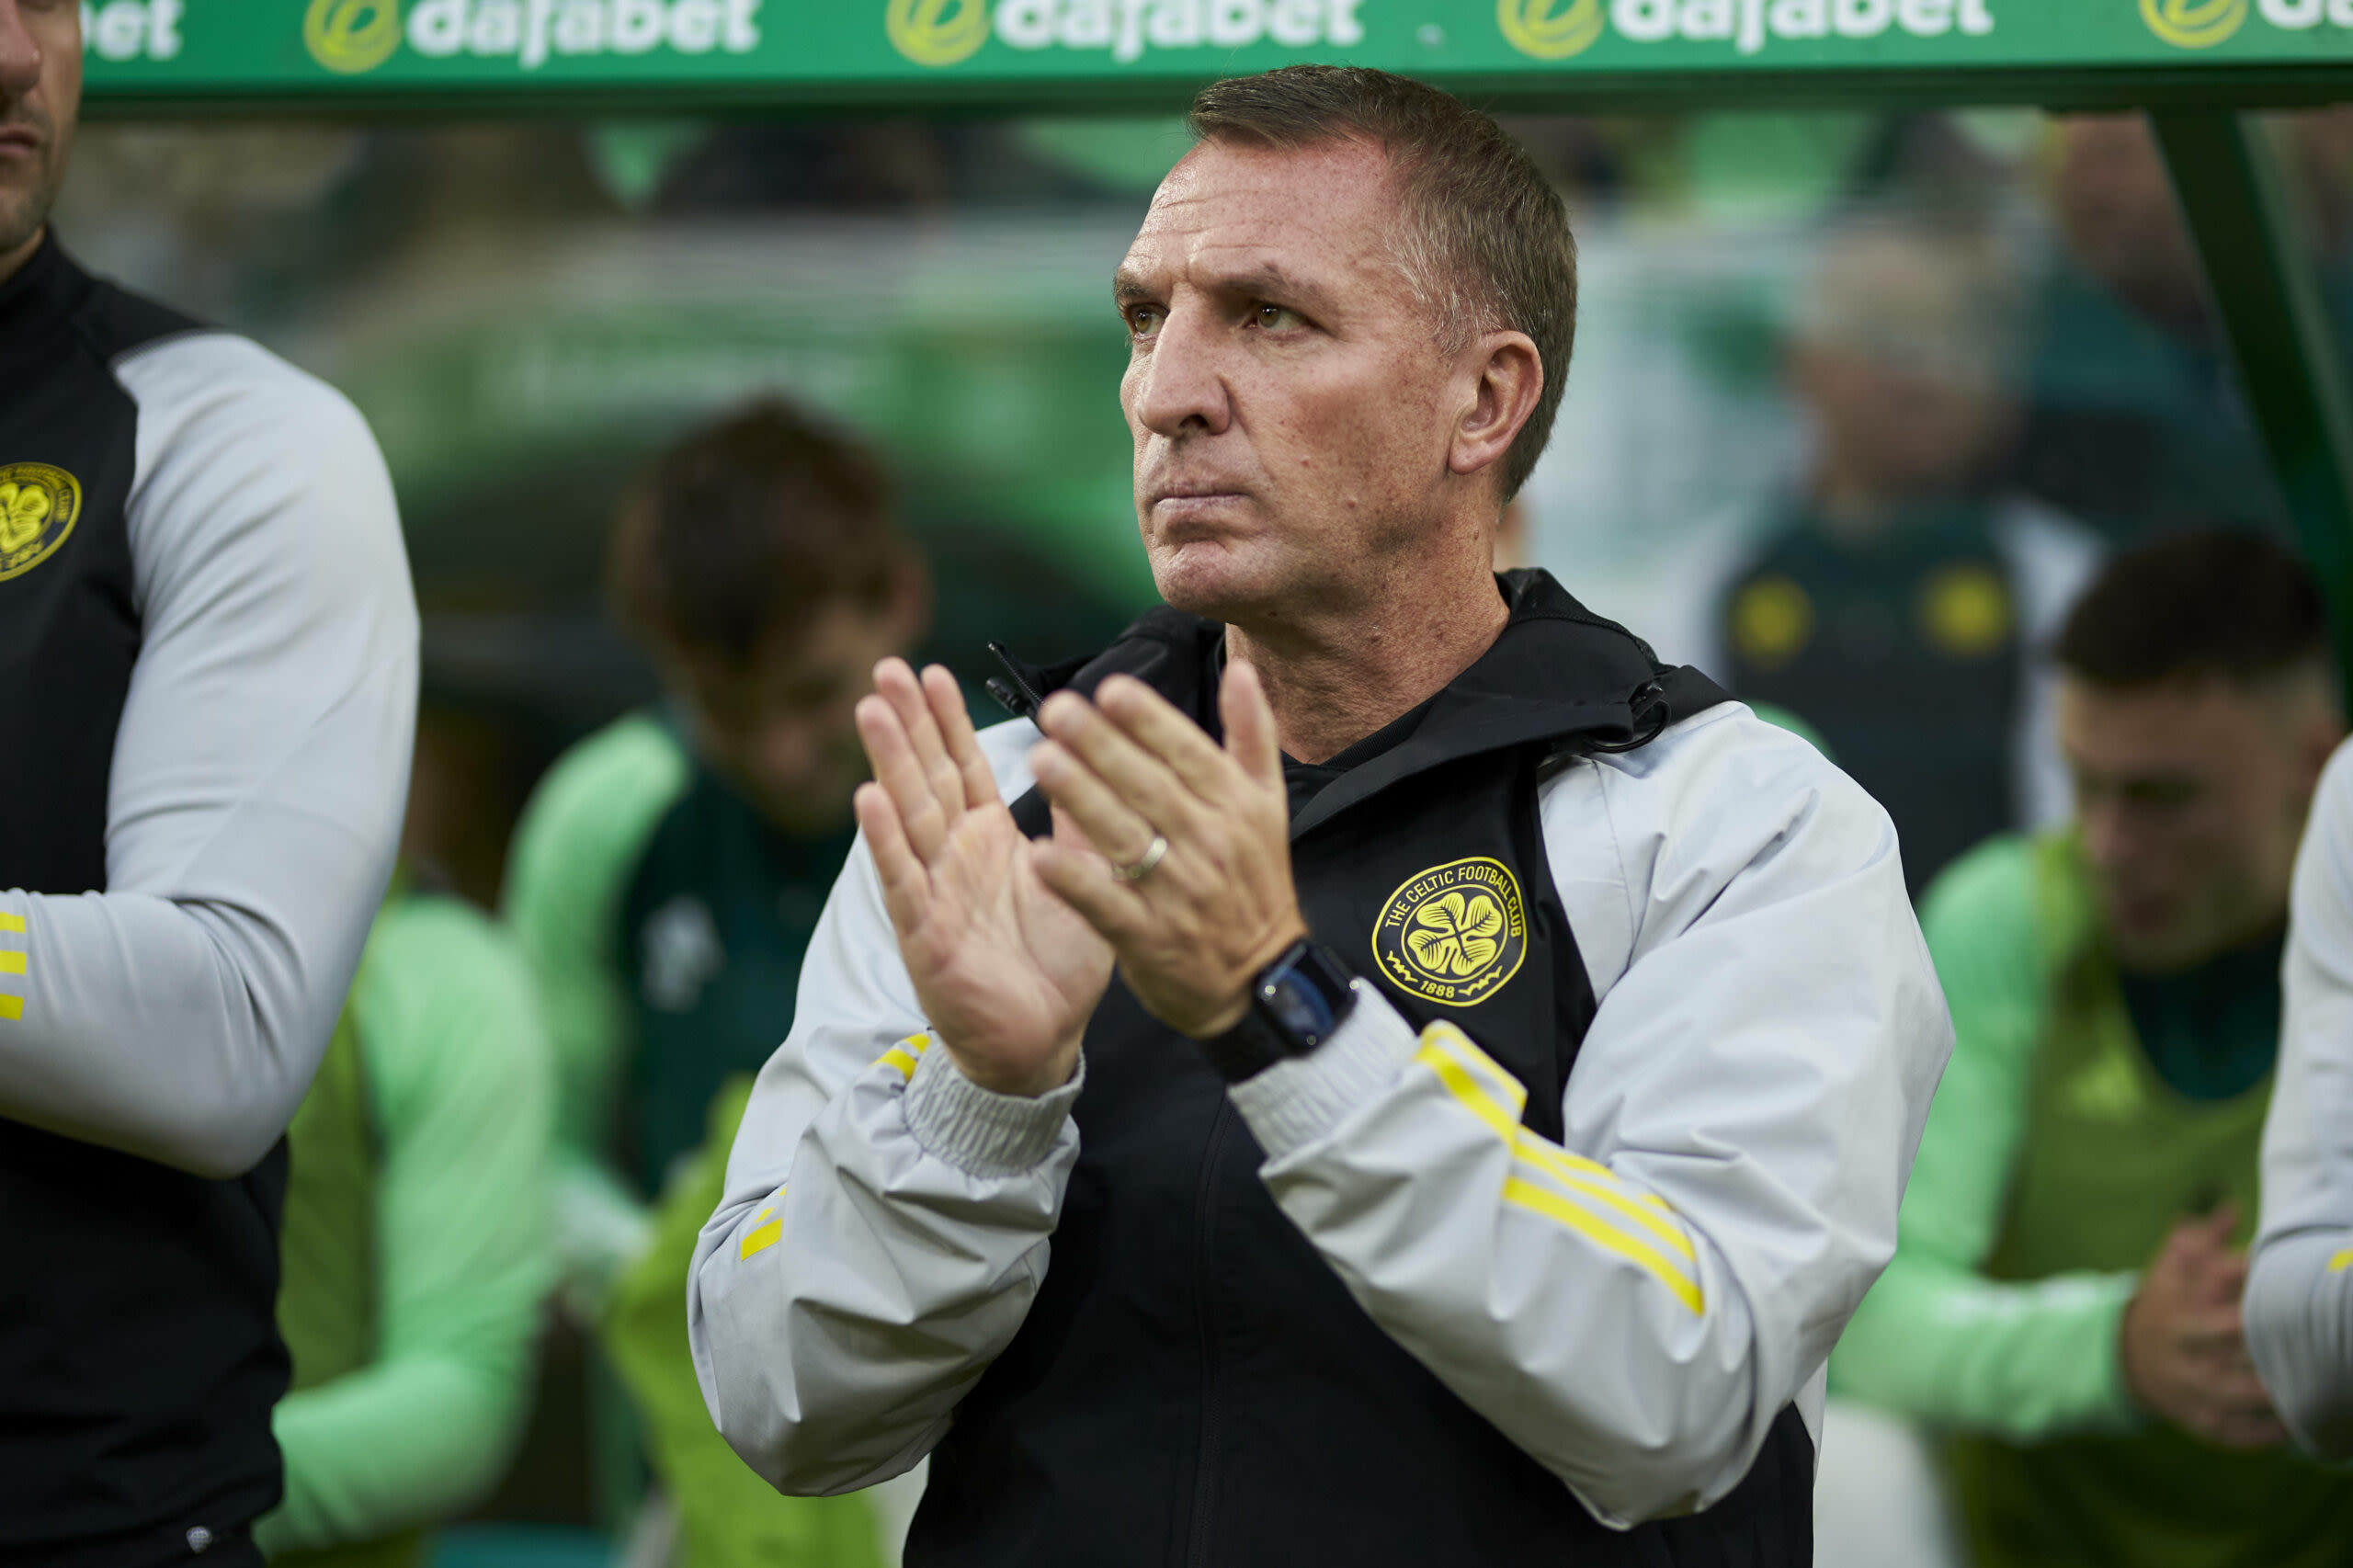 Brendan Rodgers Confirms Celtic Are About to Complete Signing of 22-year-old Star